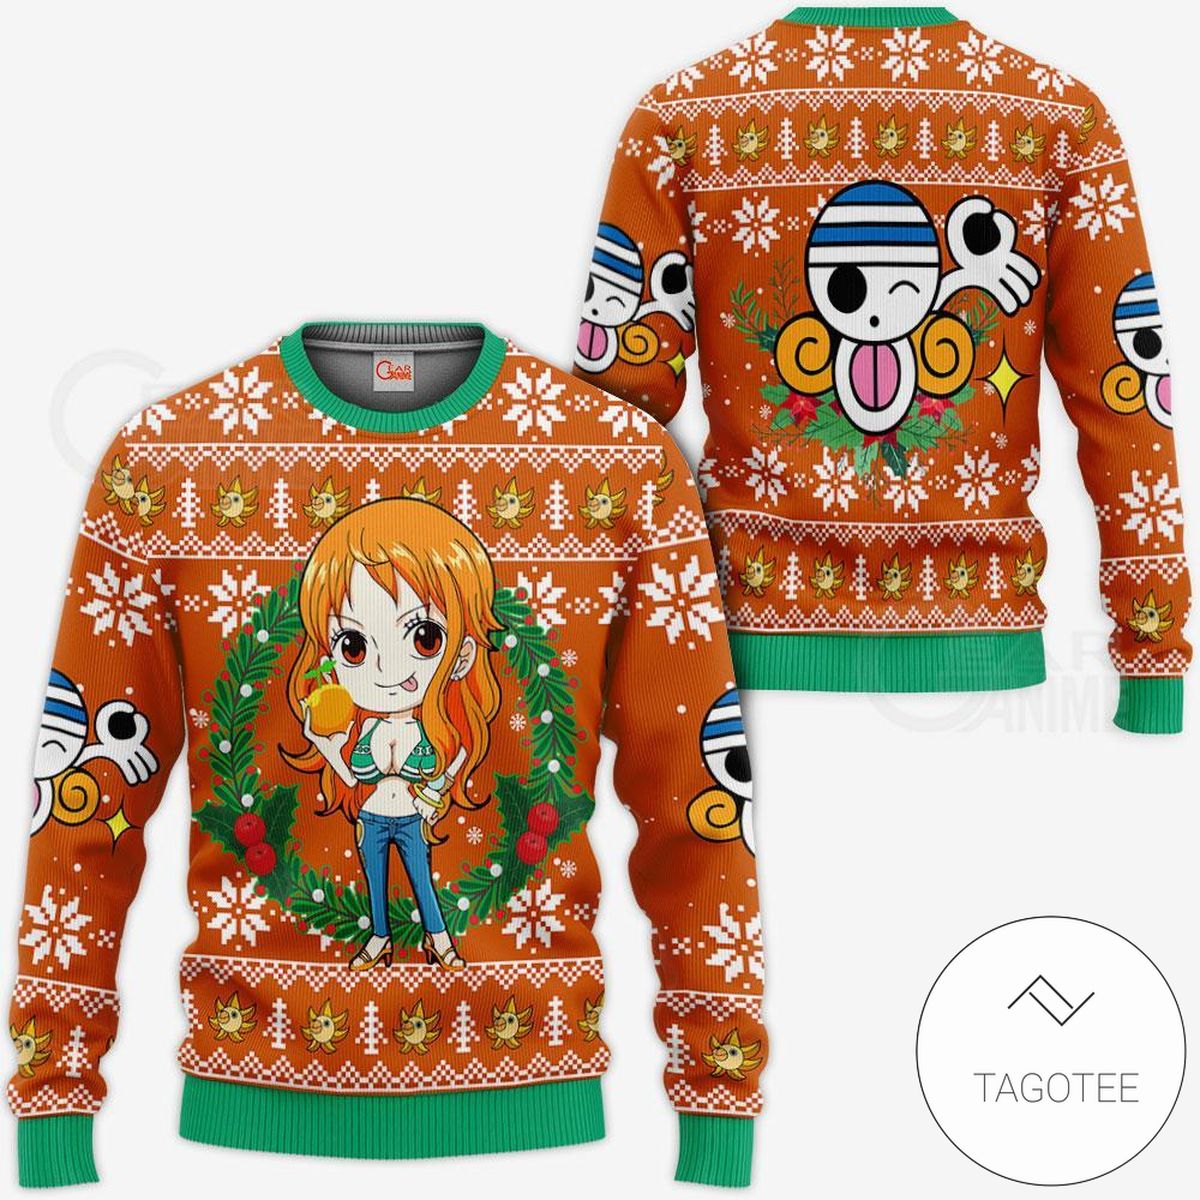 Nami Knitted Ugly Christmas Sweater One Piece Anime Xmas